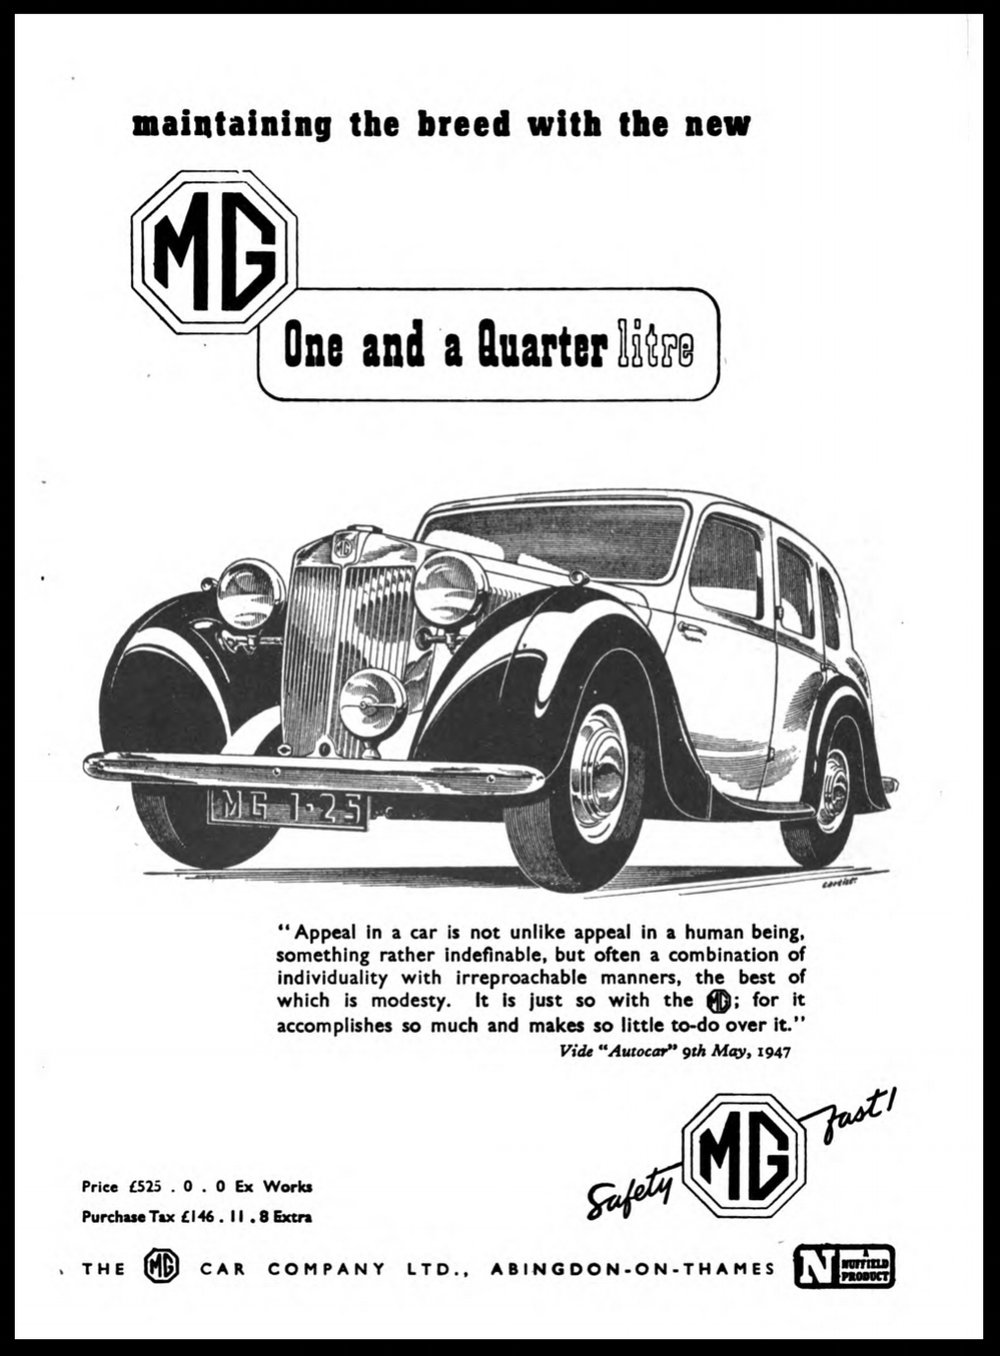 CLASSIC MG BRITISH CAR COMPANY PORCELAIN ENAMEL SIGN SIZE 4" WEIGHT 3,7 LB!